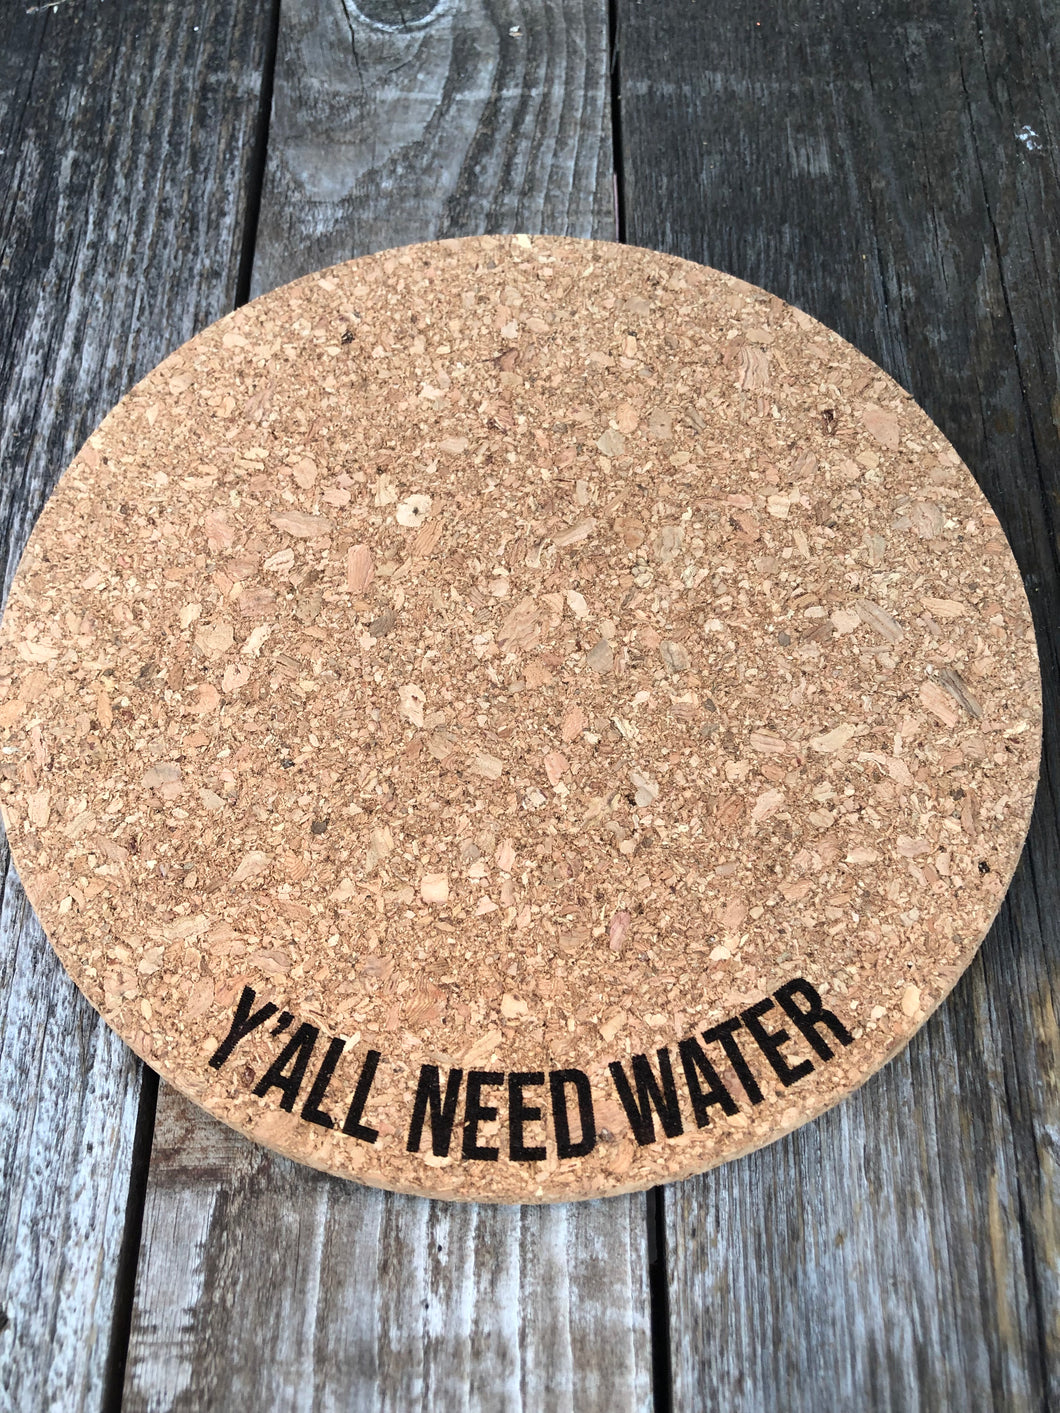 Y'all Need Water Cork Plant Mat - Engraved Cork Round - Cork Bottom - No Plastic or Rubber - All Natural Material